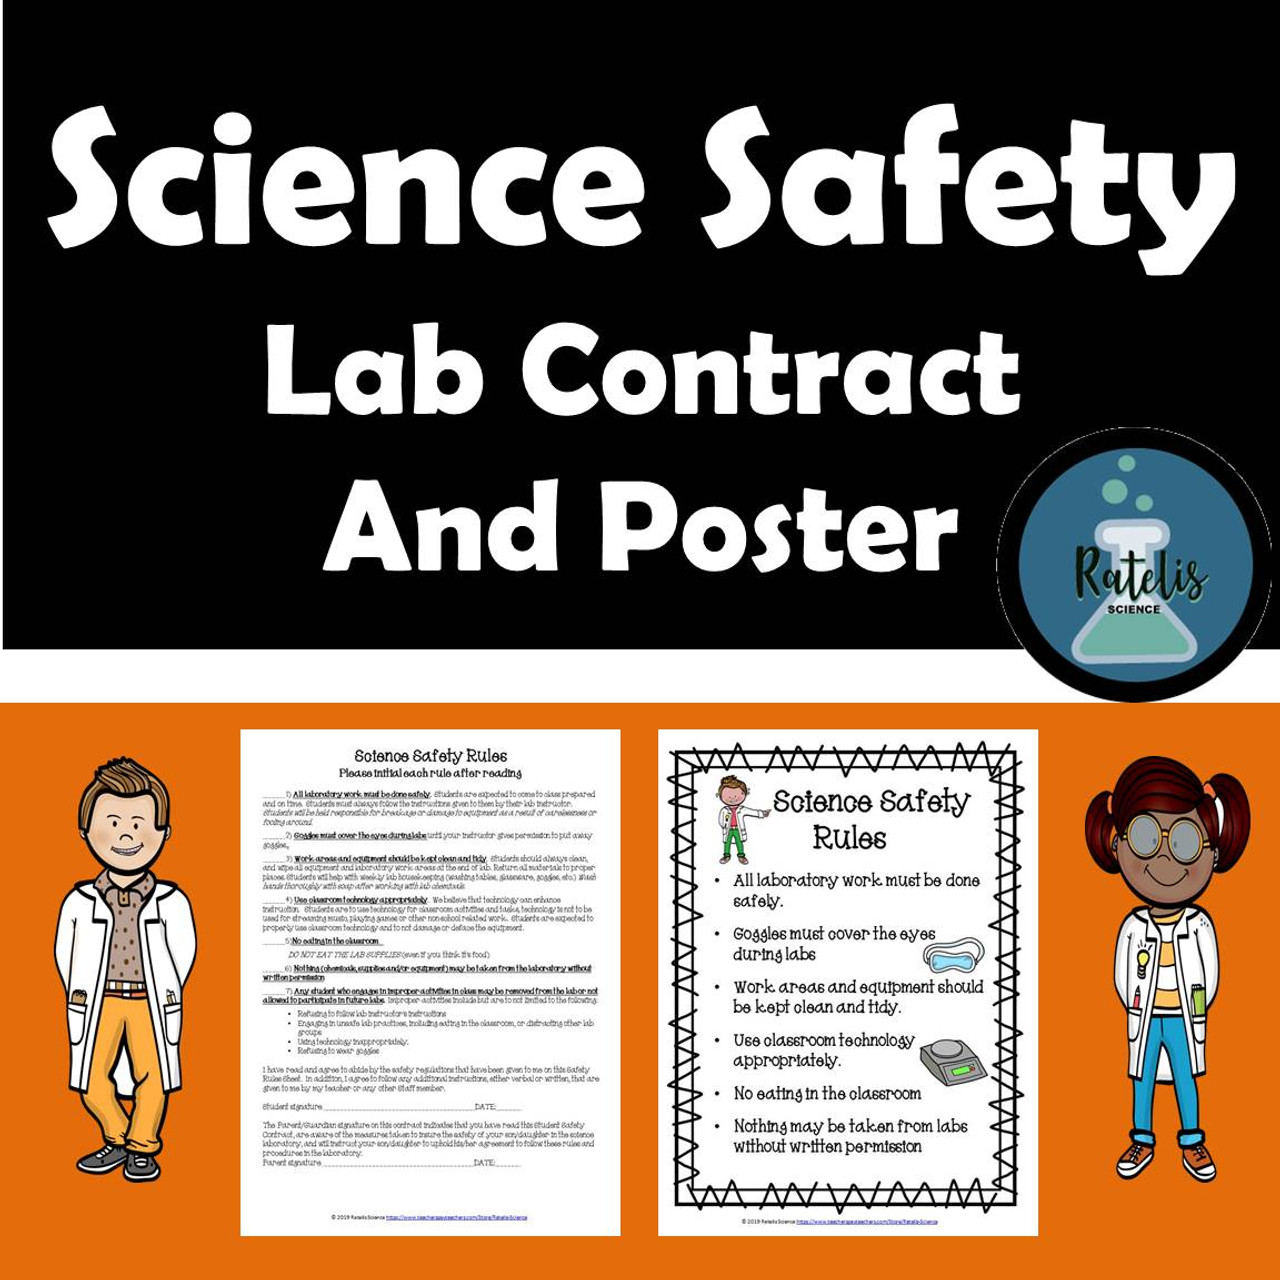 science lab safety rules poster